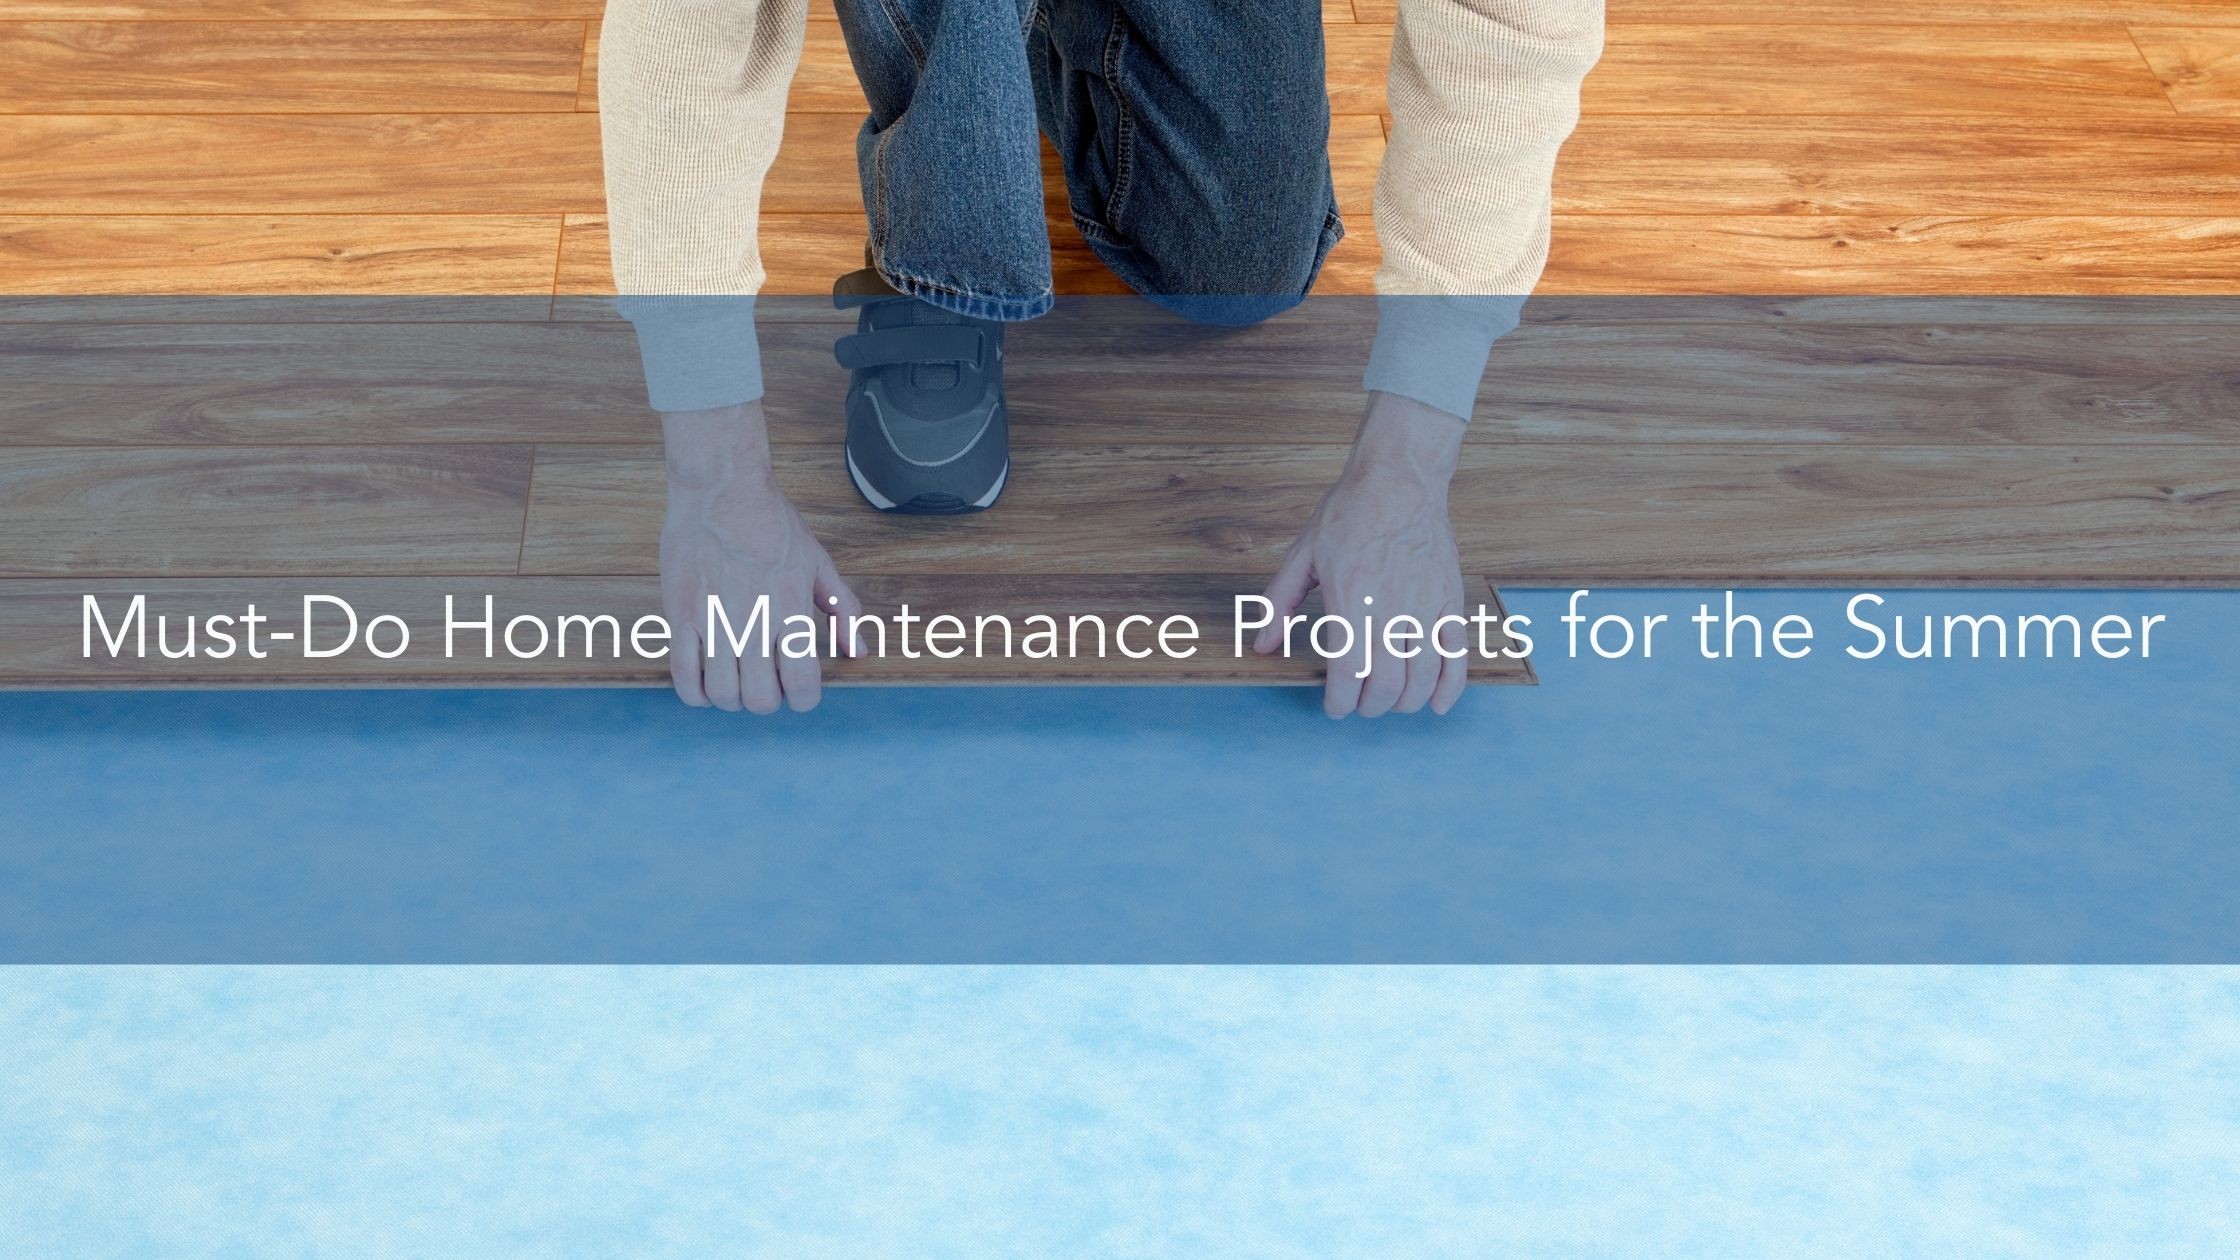 Must-Do Home Maintenance Projects for the Summer